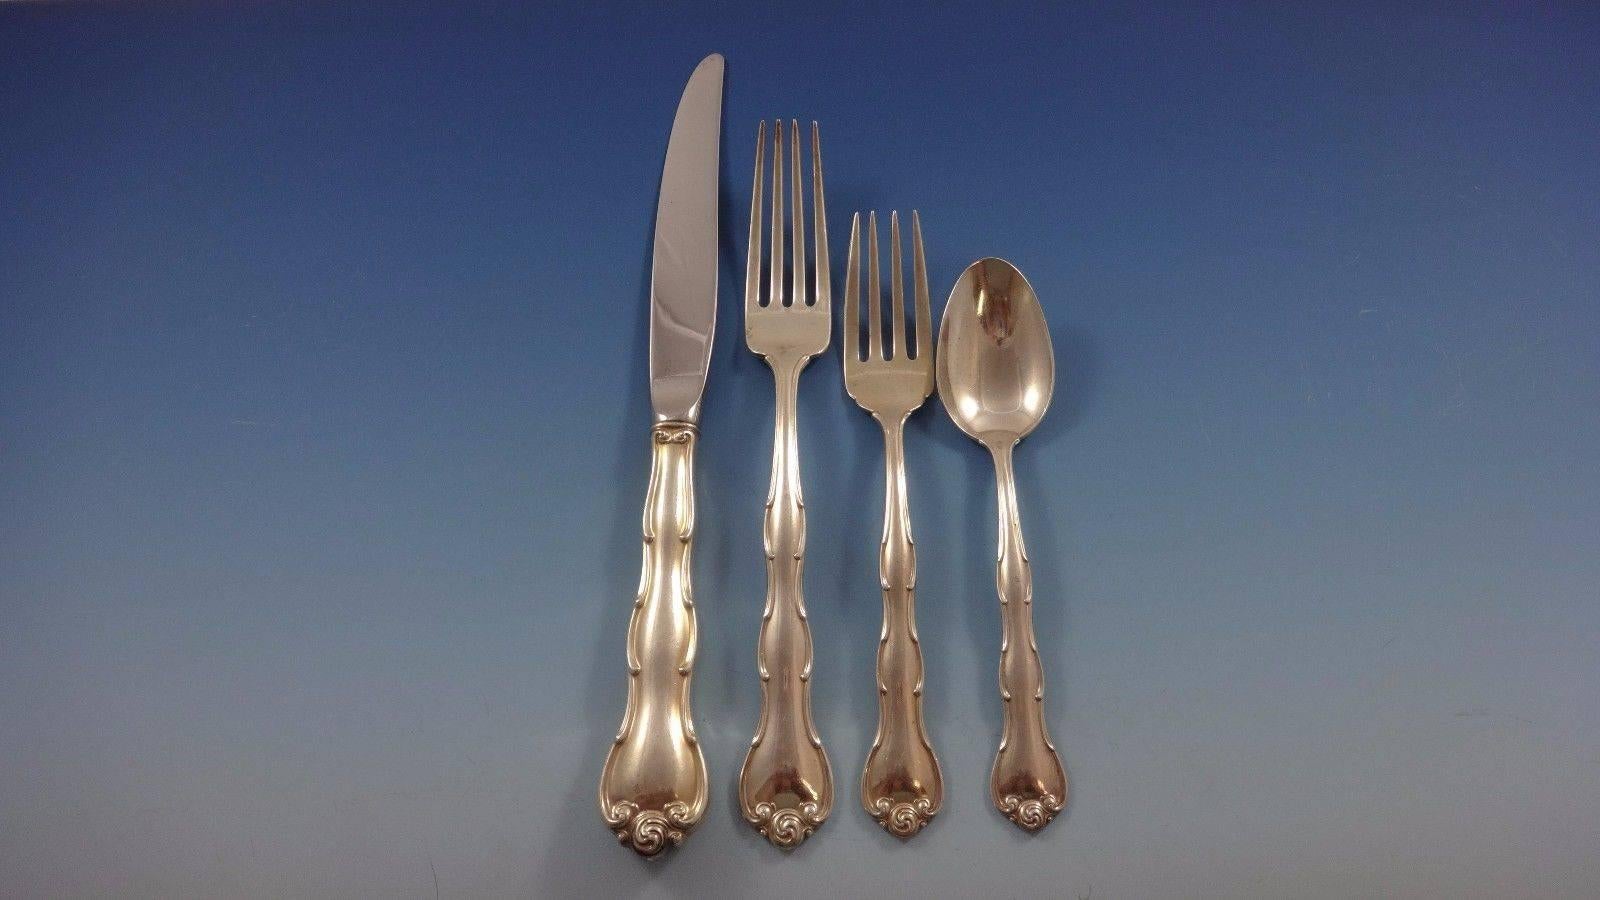 Gorham Rondo Place Soup Spoon Details about   Sterling Silver Flatware 